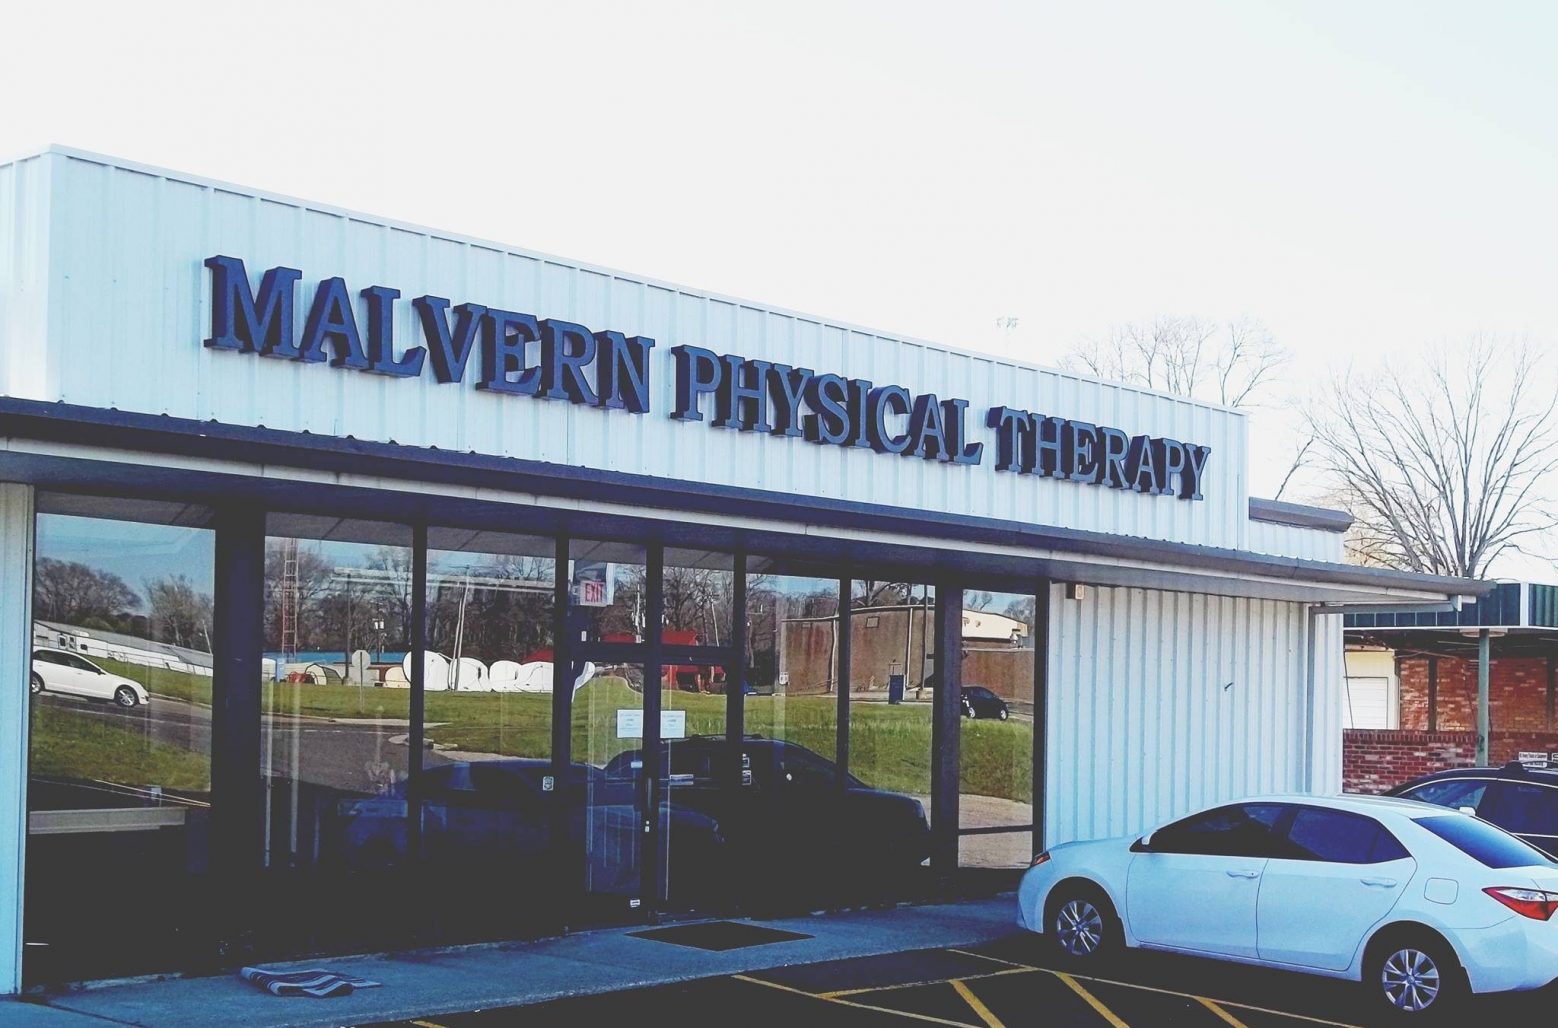 MALVERN PHYSICAL THERAPY